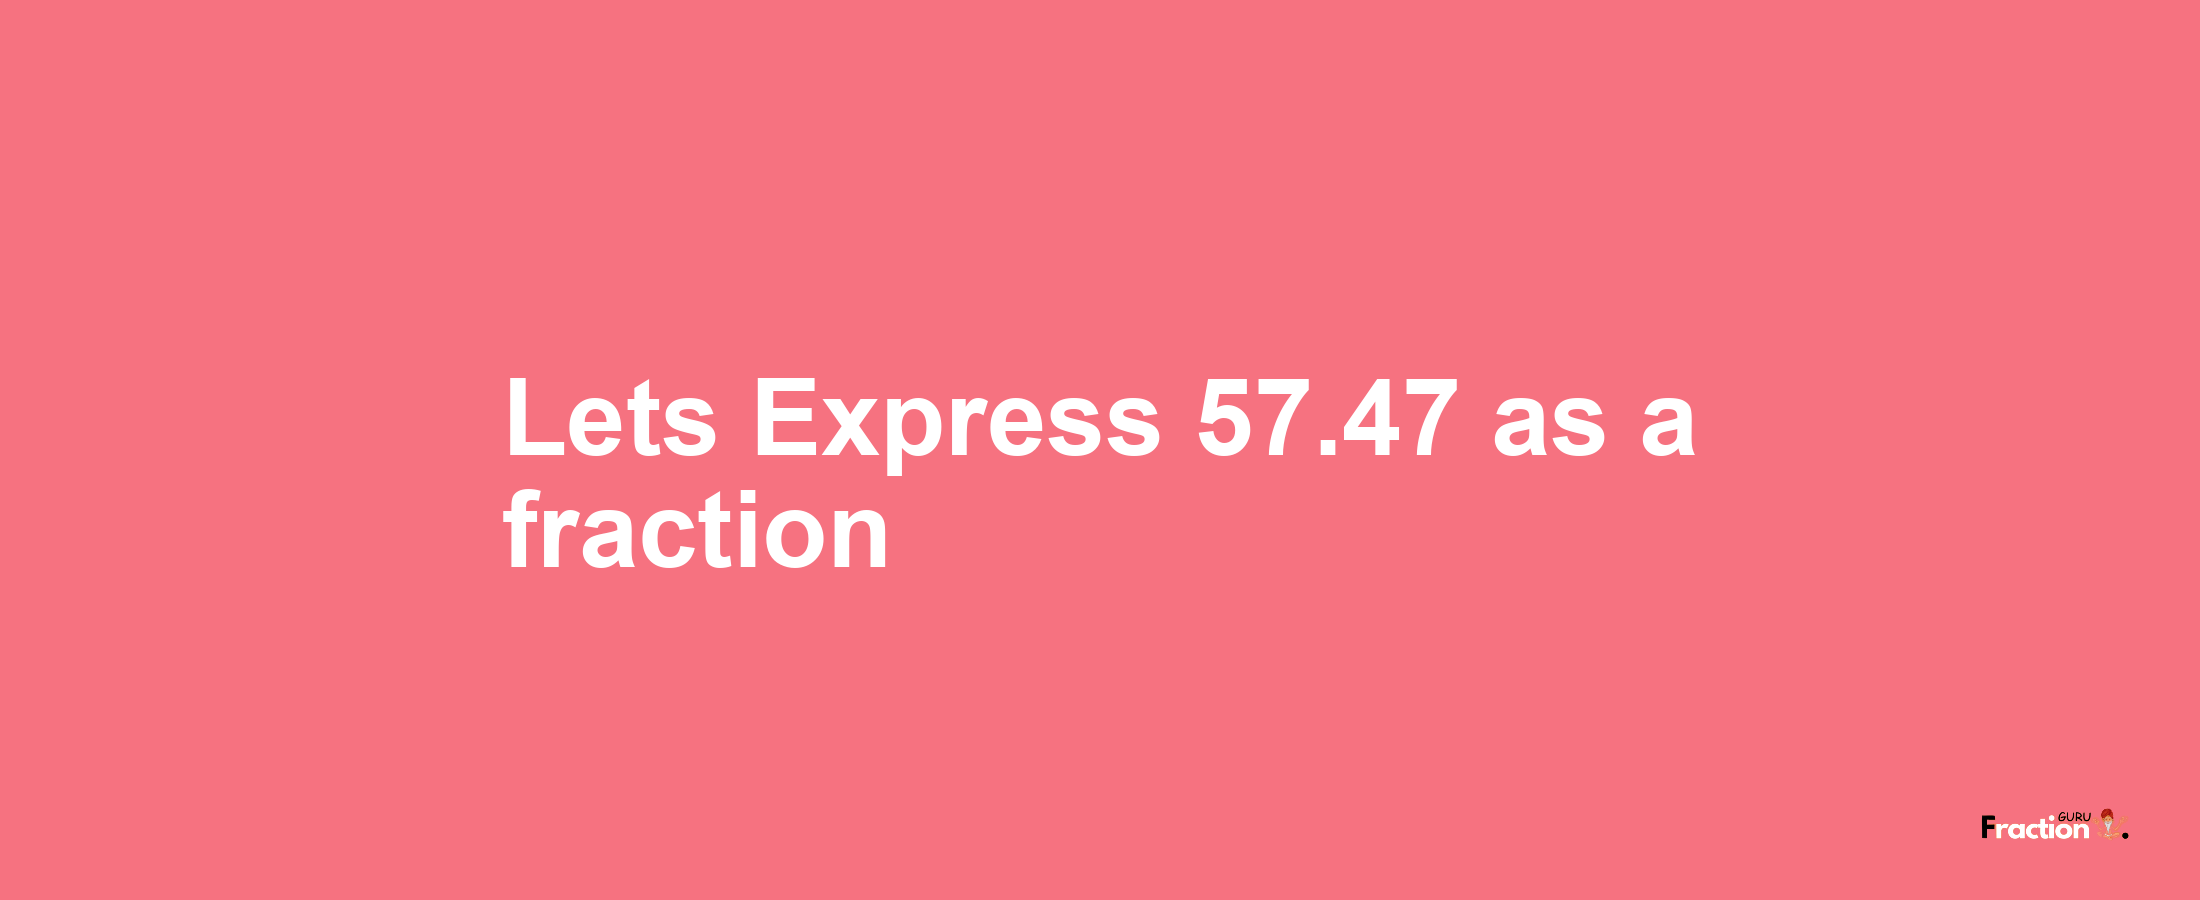 Lets Express 57.47 as afraction